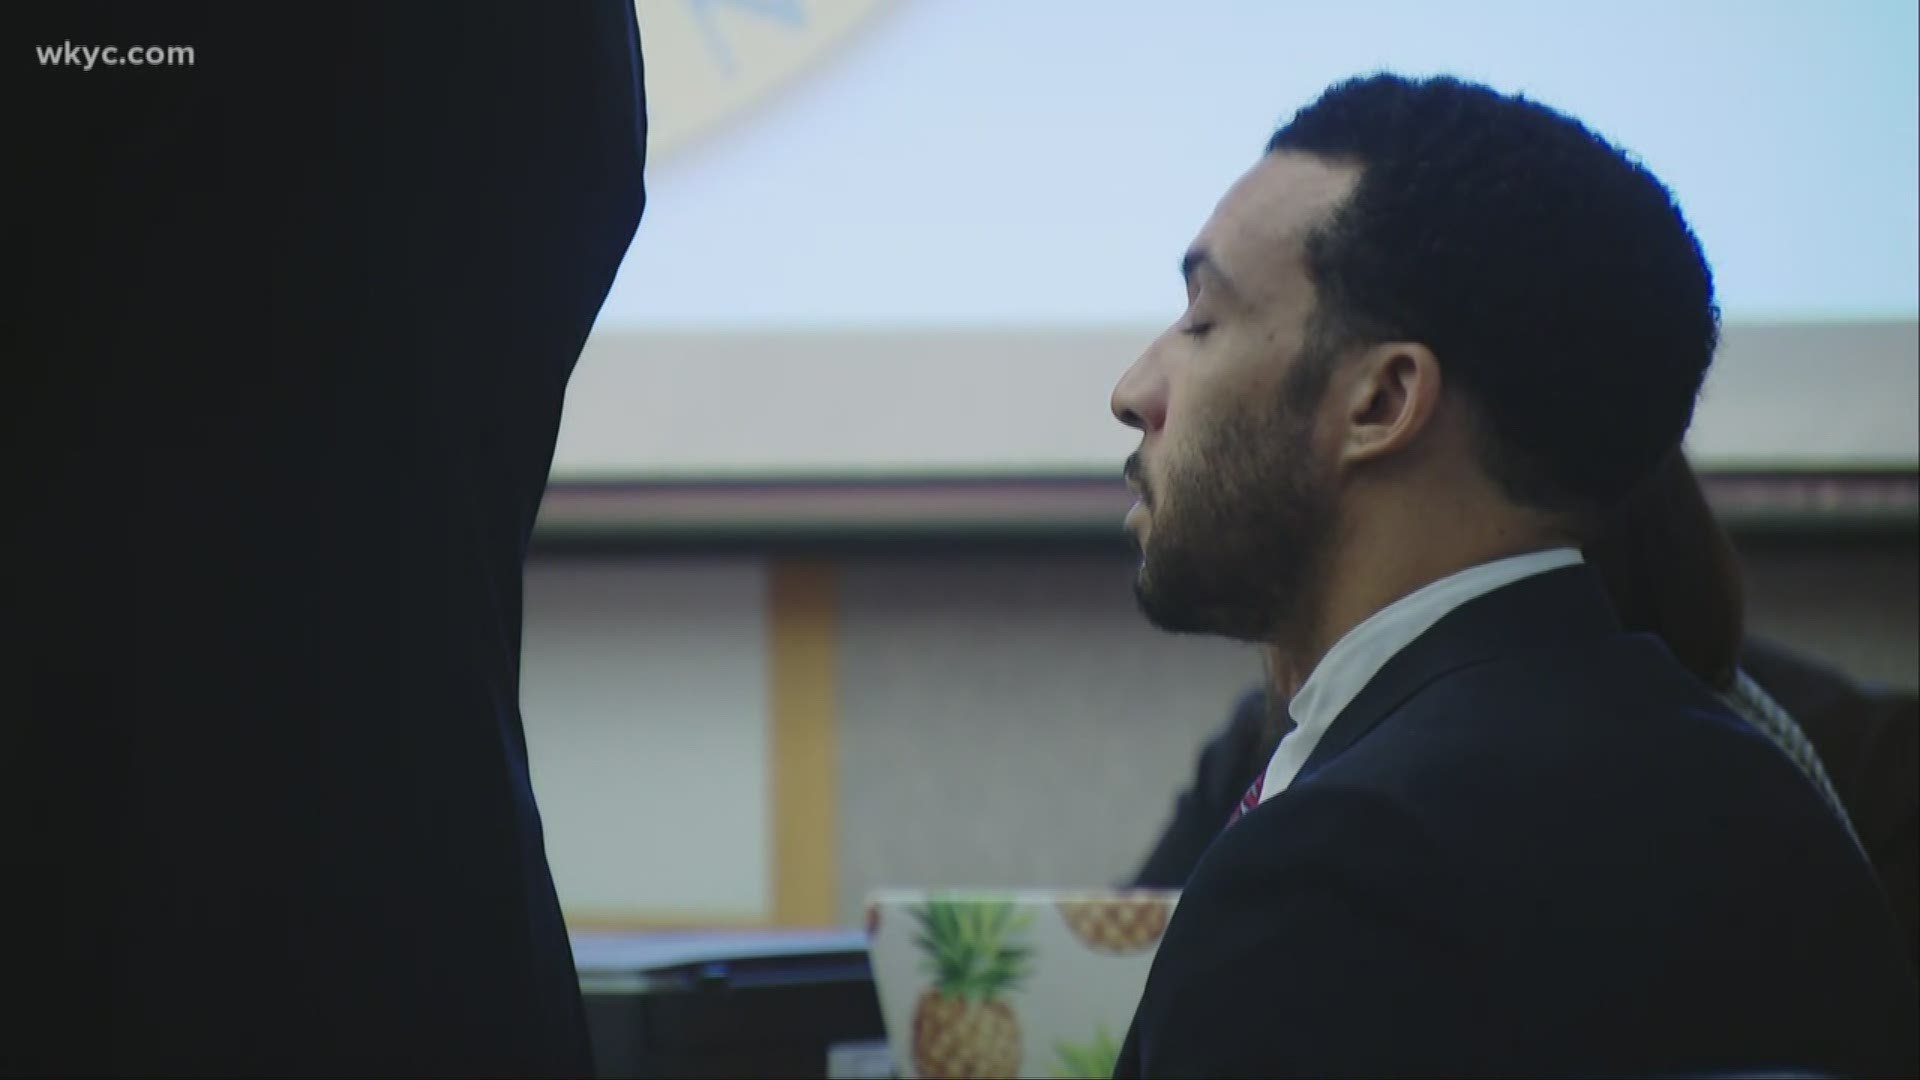 Former NFL player Kellen Winslow Jr. pleaded guilty Monday to raping an unconscious teen and sexual battery involving a 54-year-old hitchhiker.